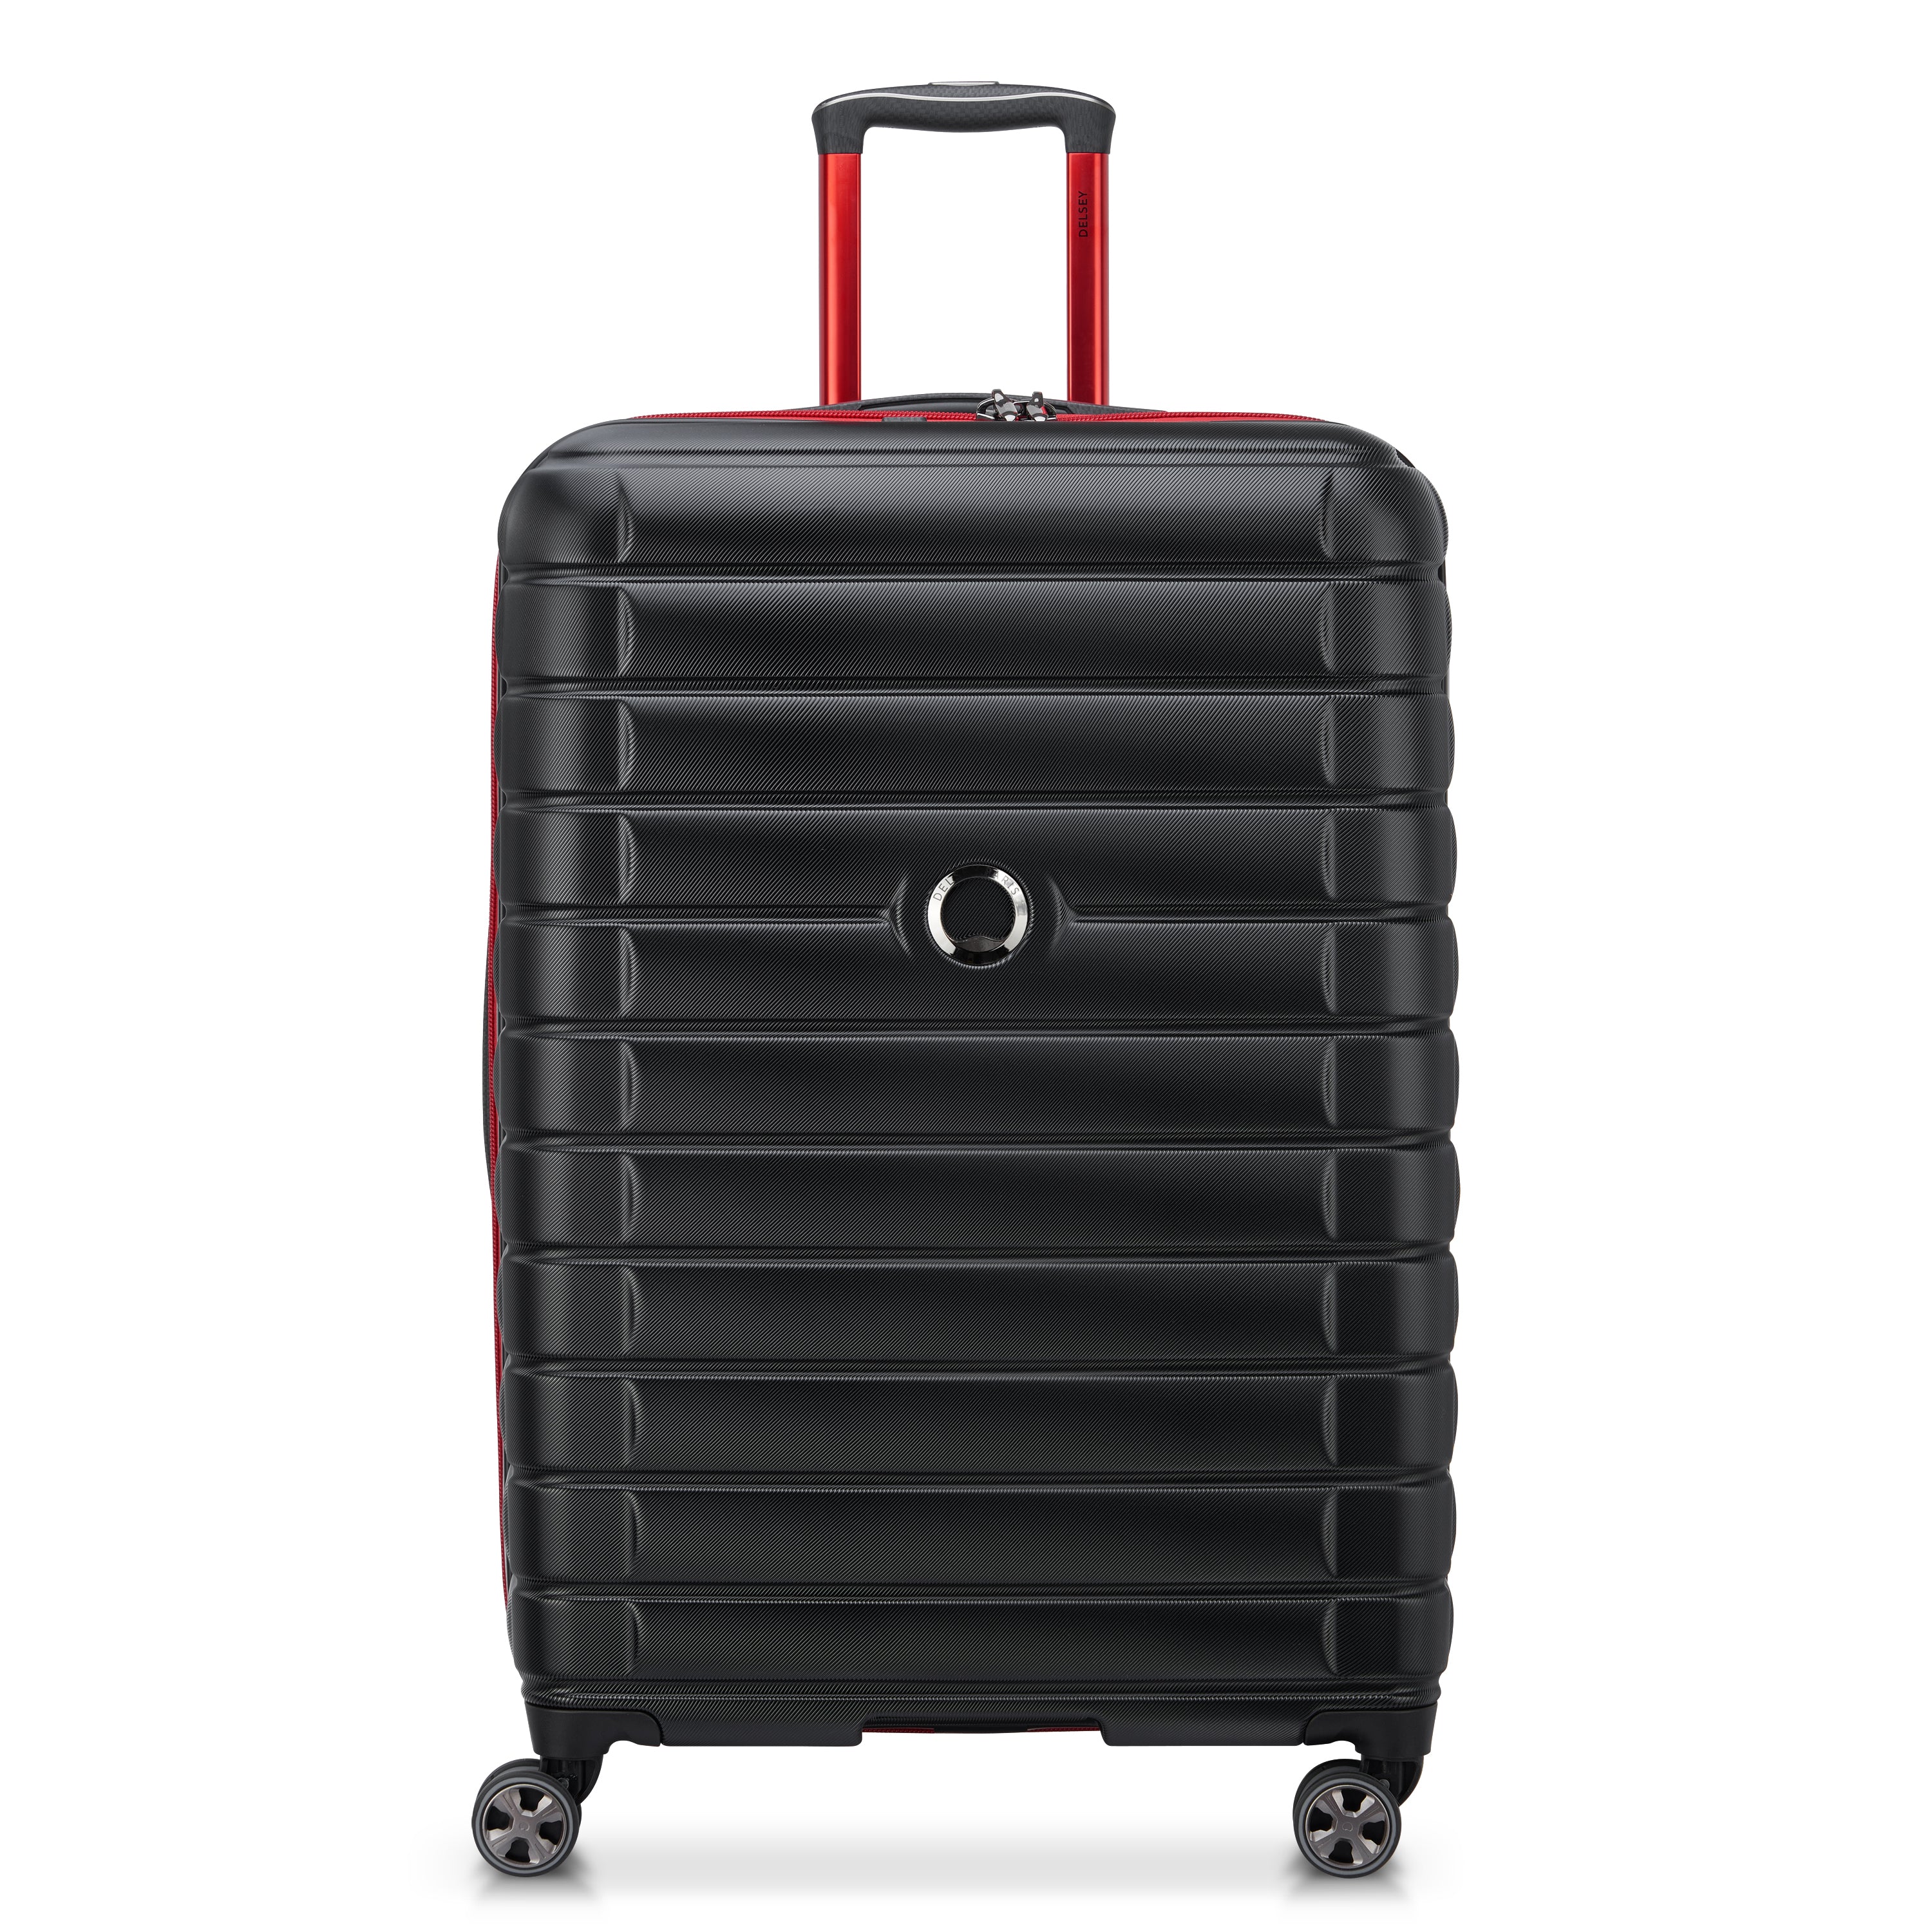 Delsey Shadow 5.0 Alfa Romeo F1 Collection 75cm Hardcase Expandable 4 Double Wheel Check - In Luggage Trolley Case Black - 00287882100F1 